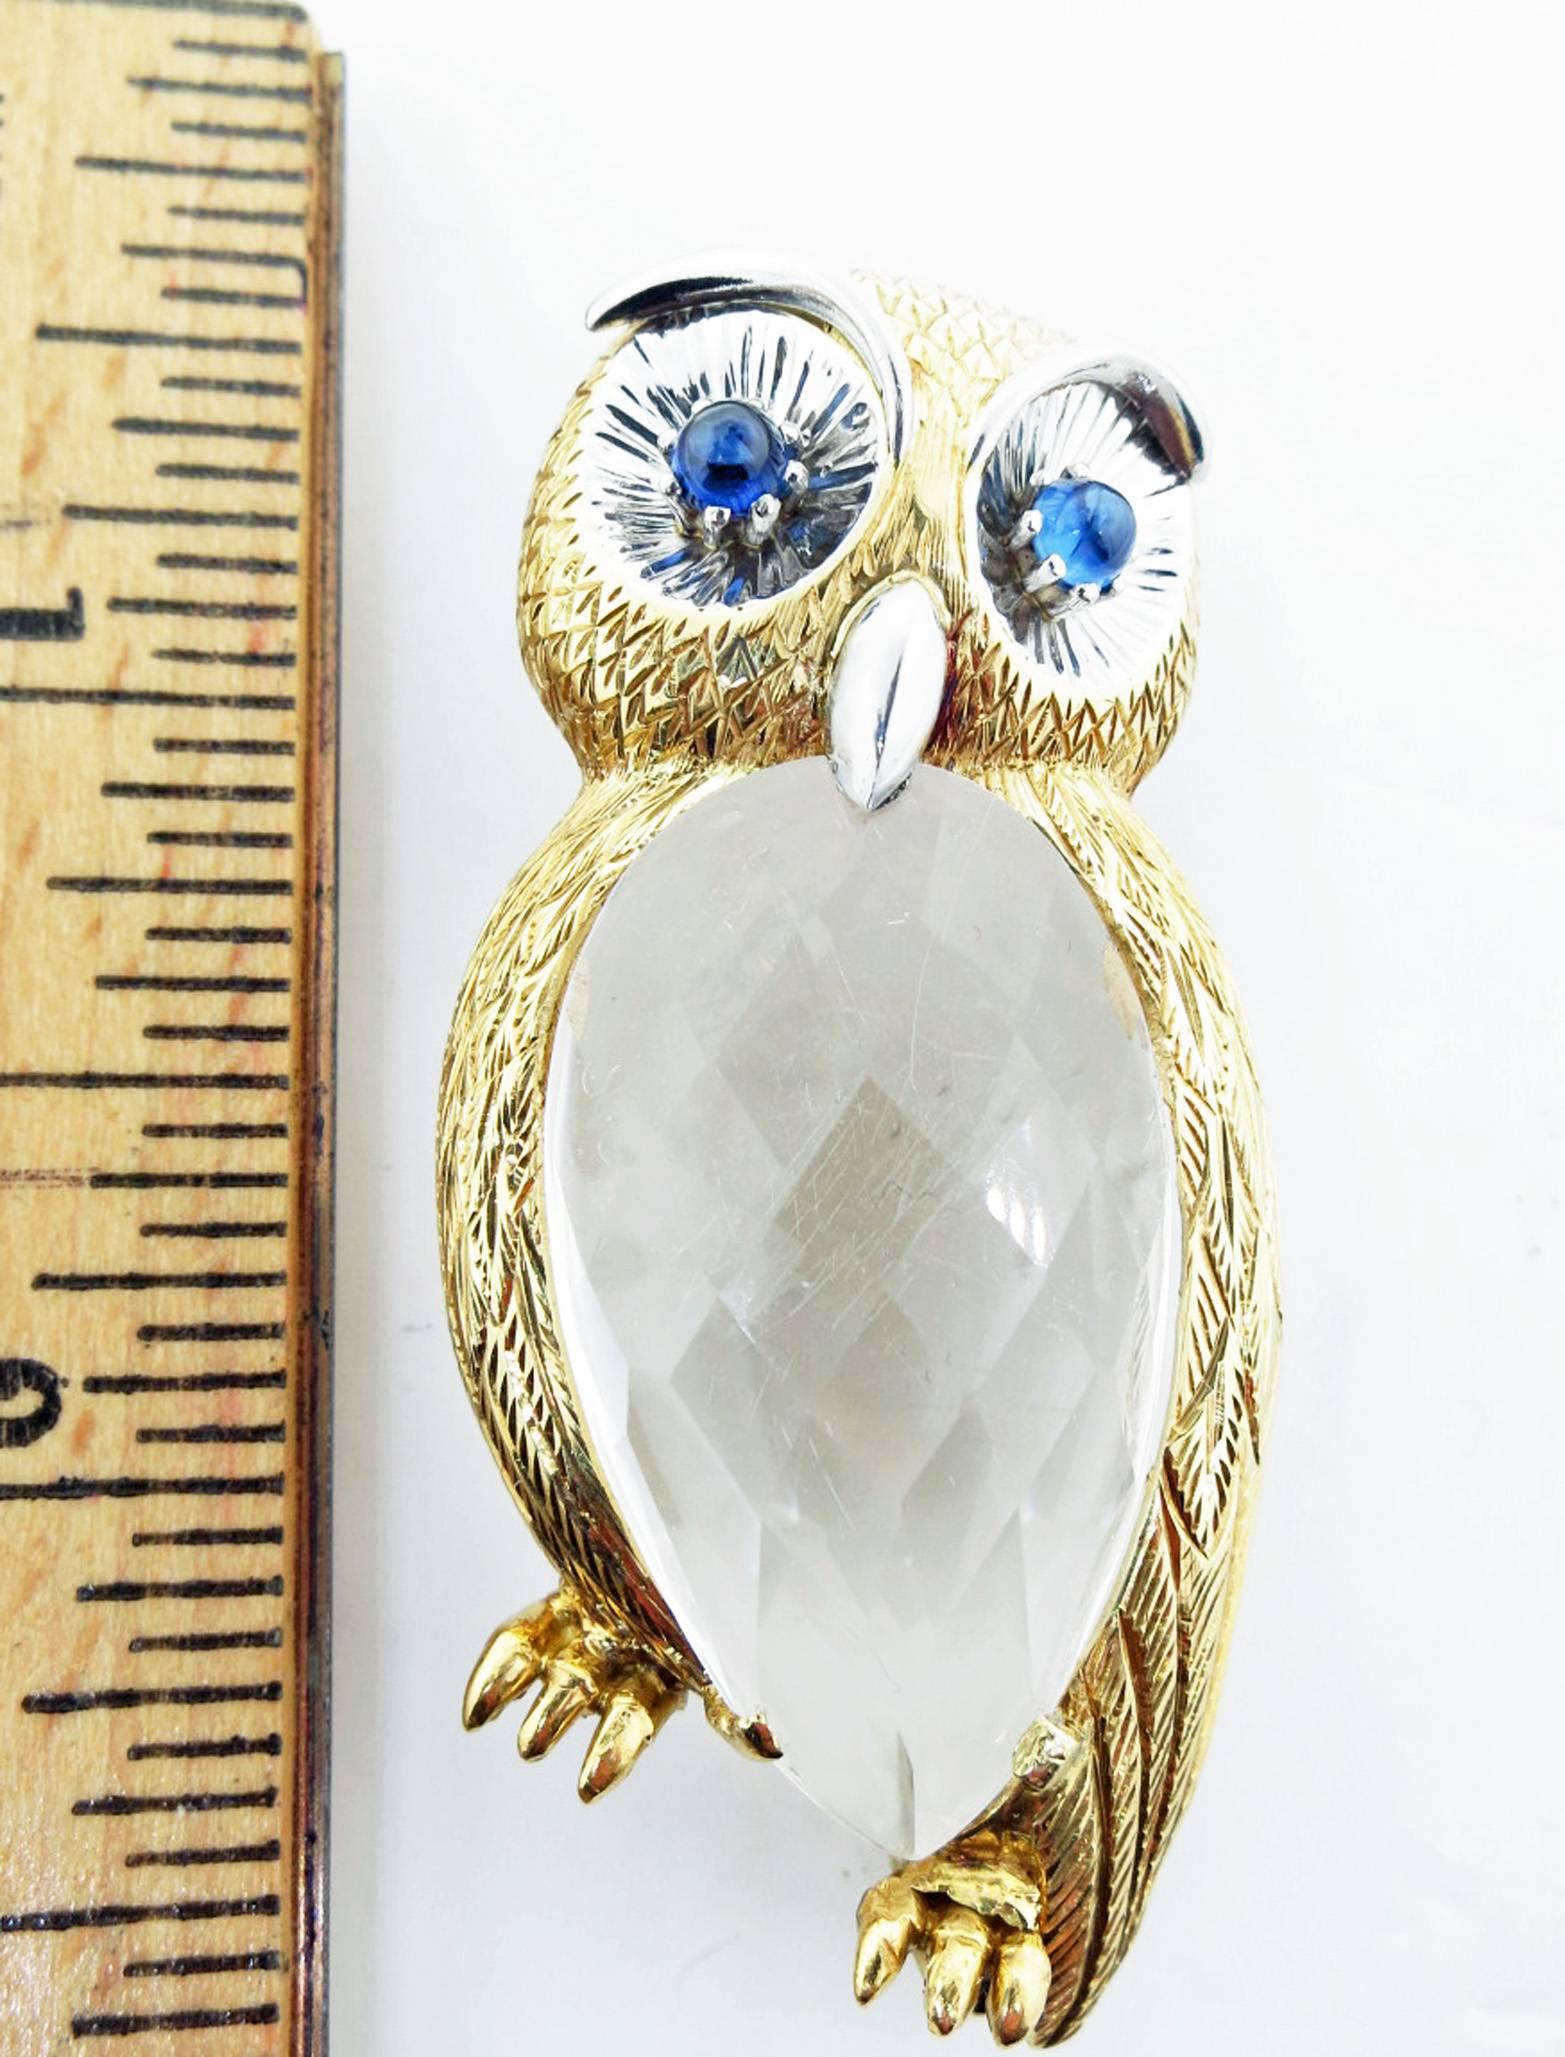 Finely detailed and dimensional 18kt. yellow and white gold owl brooch. The brooch measures approx 2 1/4 inches in length and the body is set with a faceted oval of rock crystal. Cabochon sapphire eyes and endearing expression.
Perfect for any